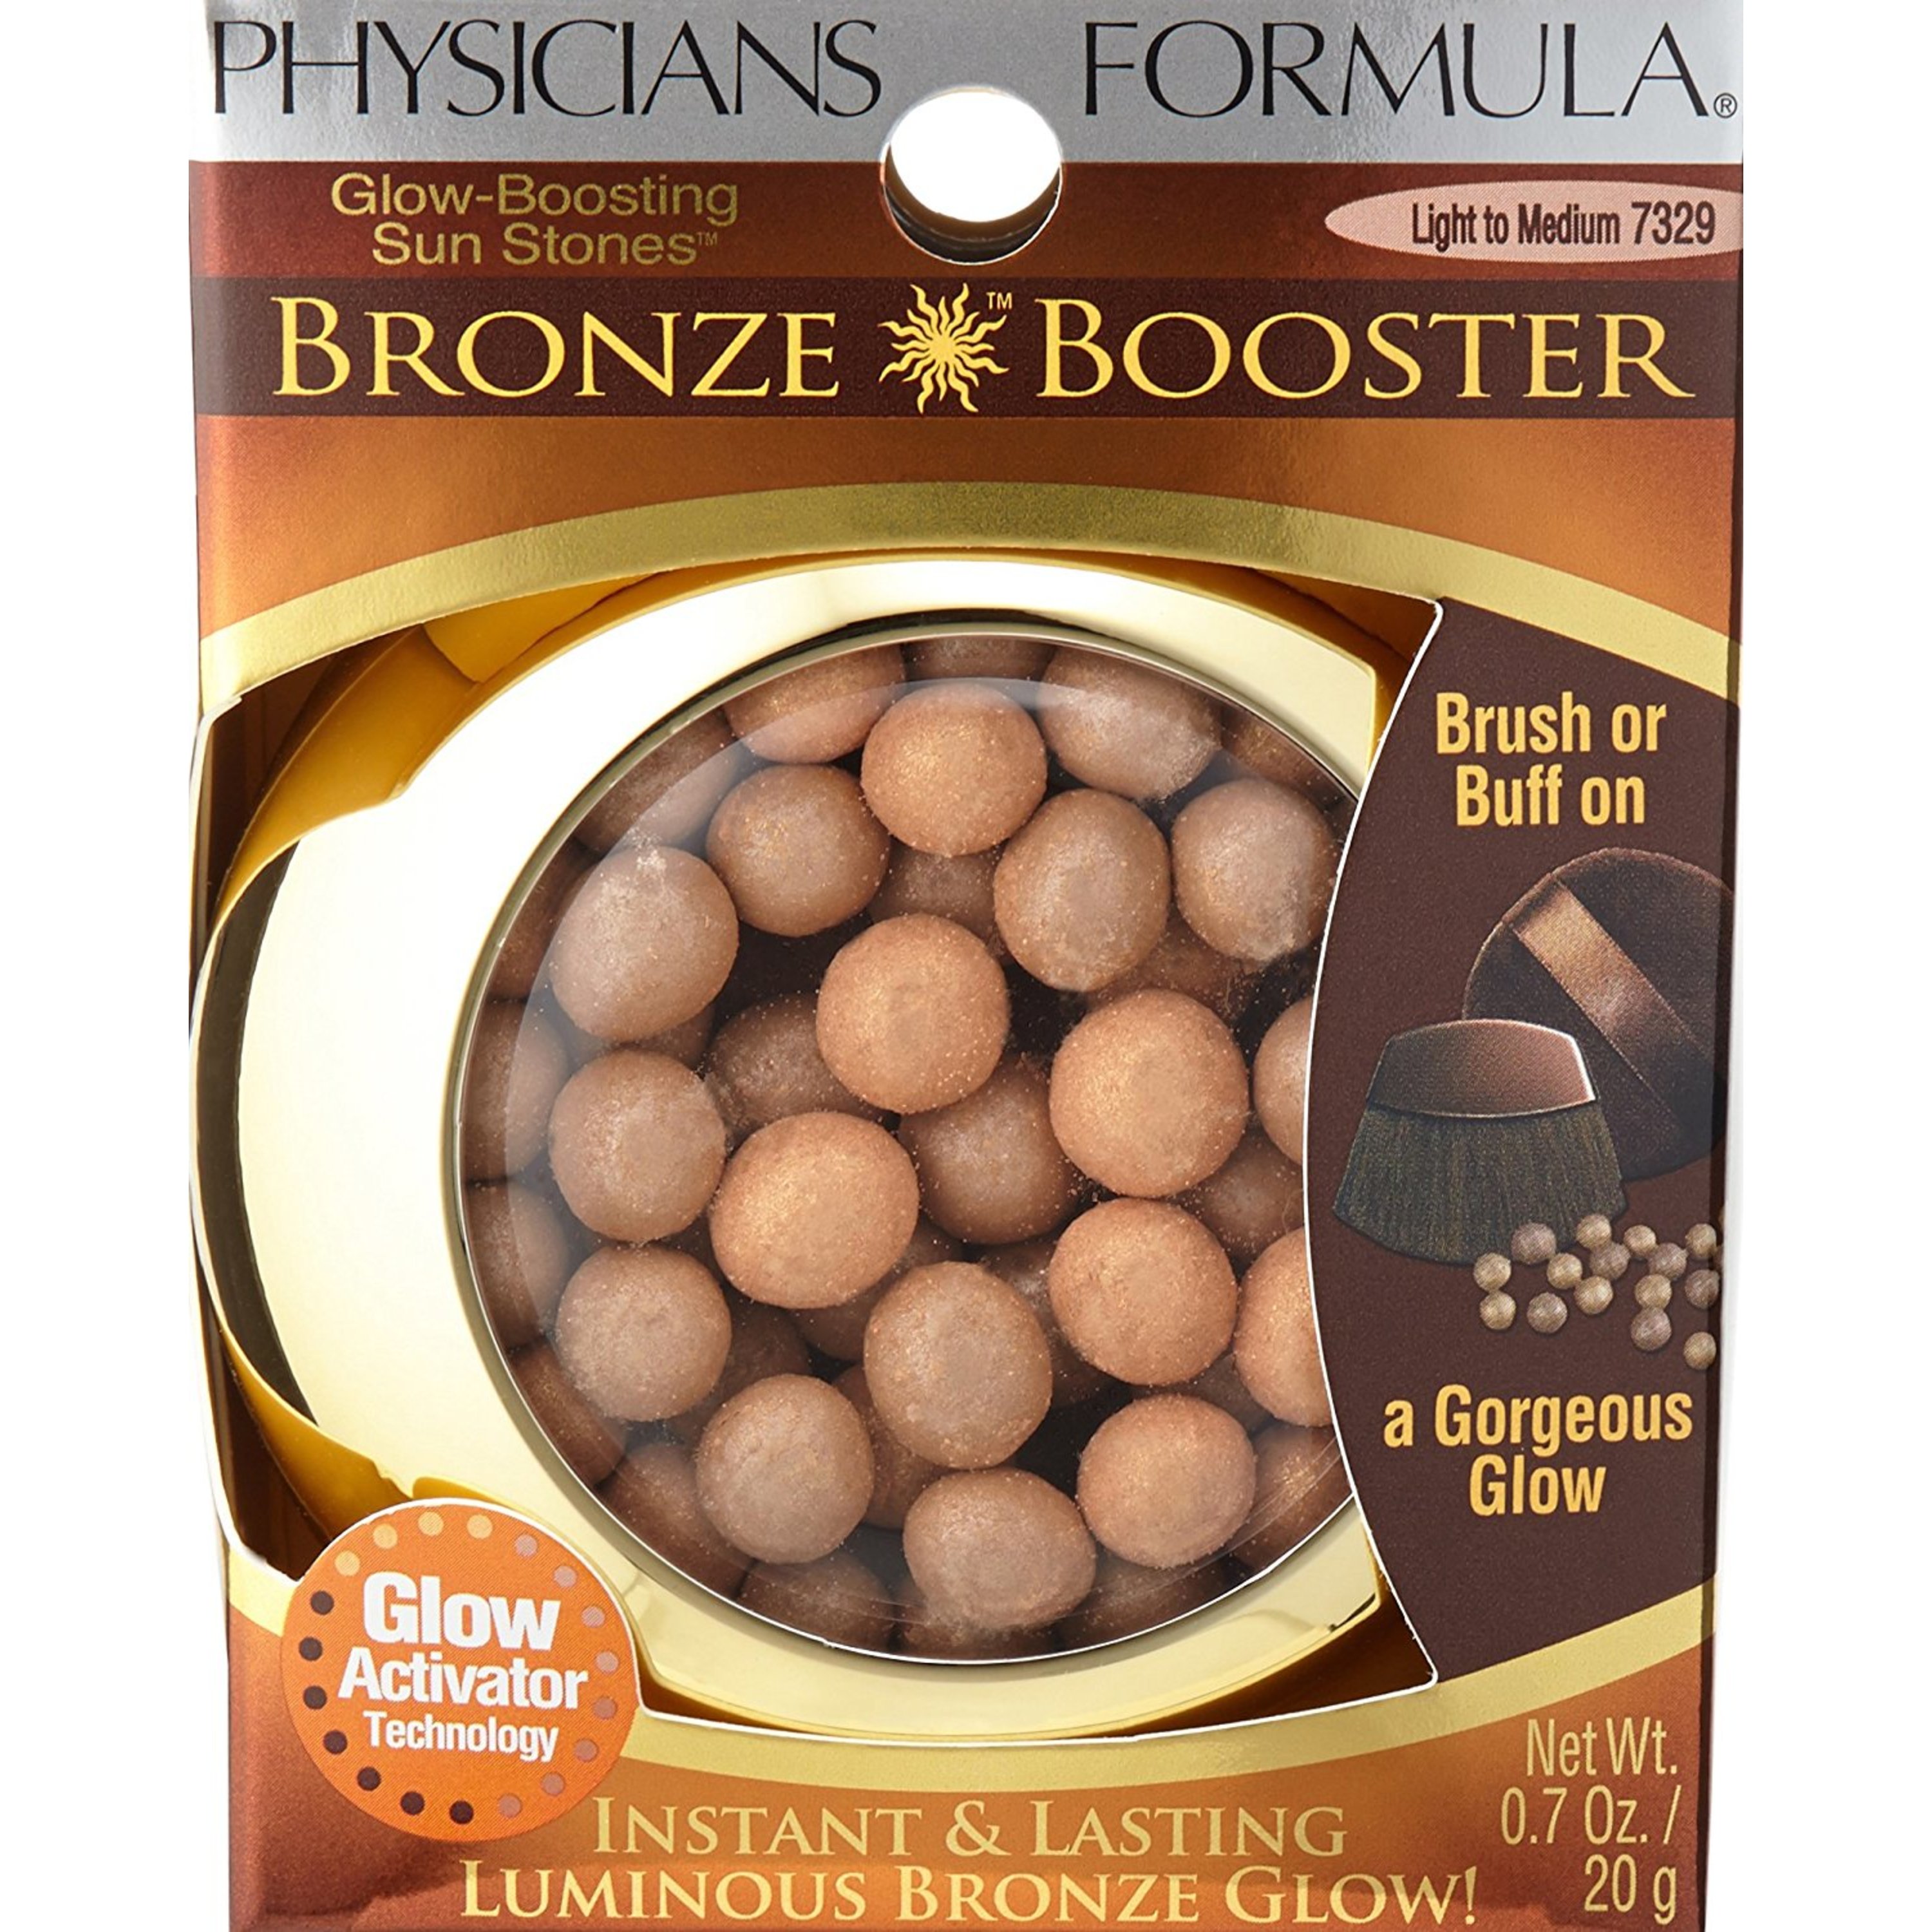 Physicians Formula Bronze Booster Glow-Boosting Sun Stones, Light to Medium - image 3 of 5